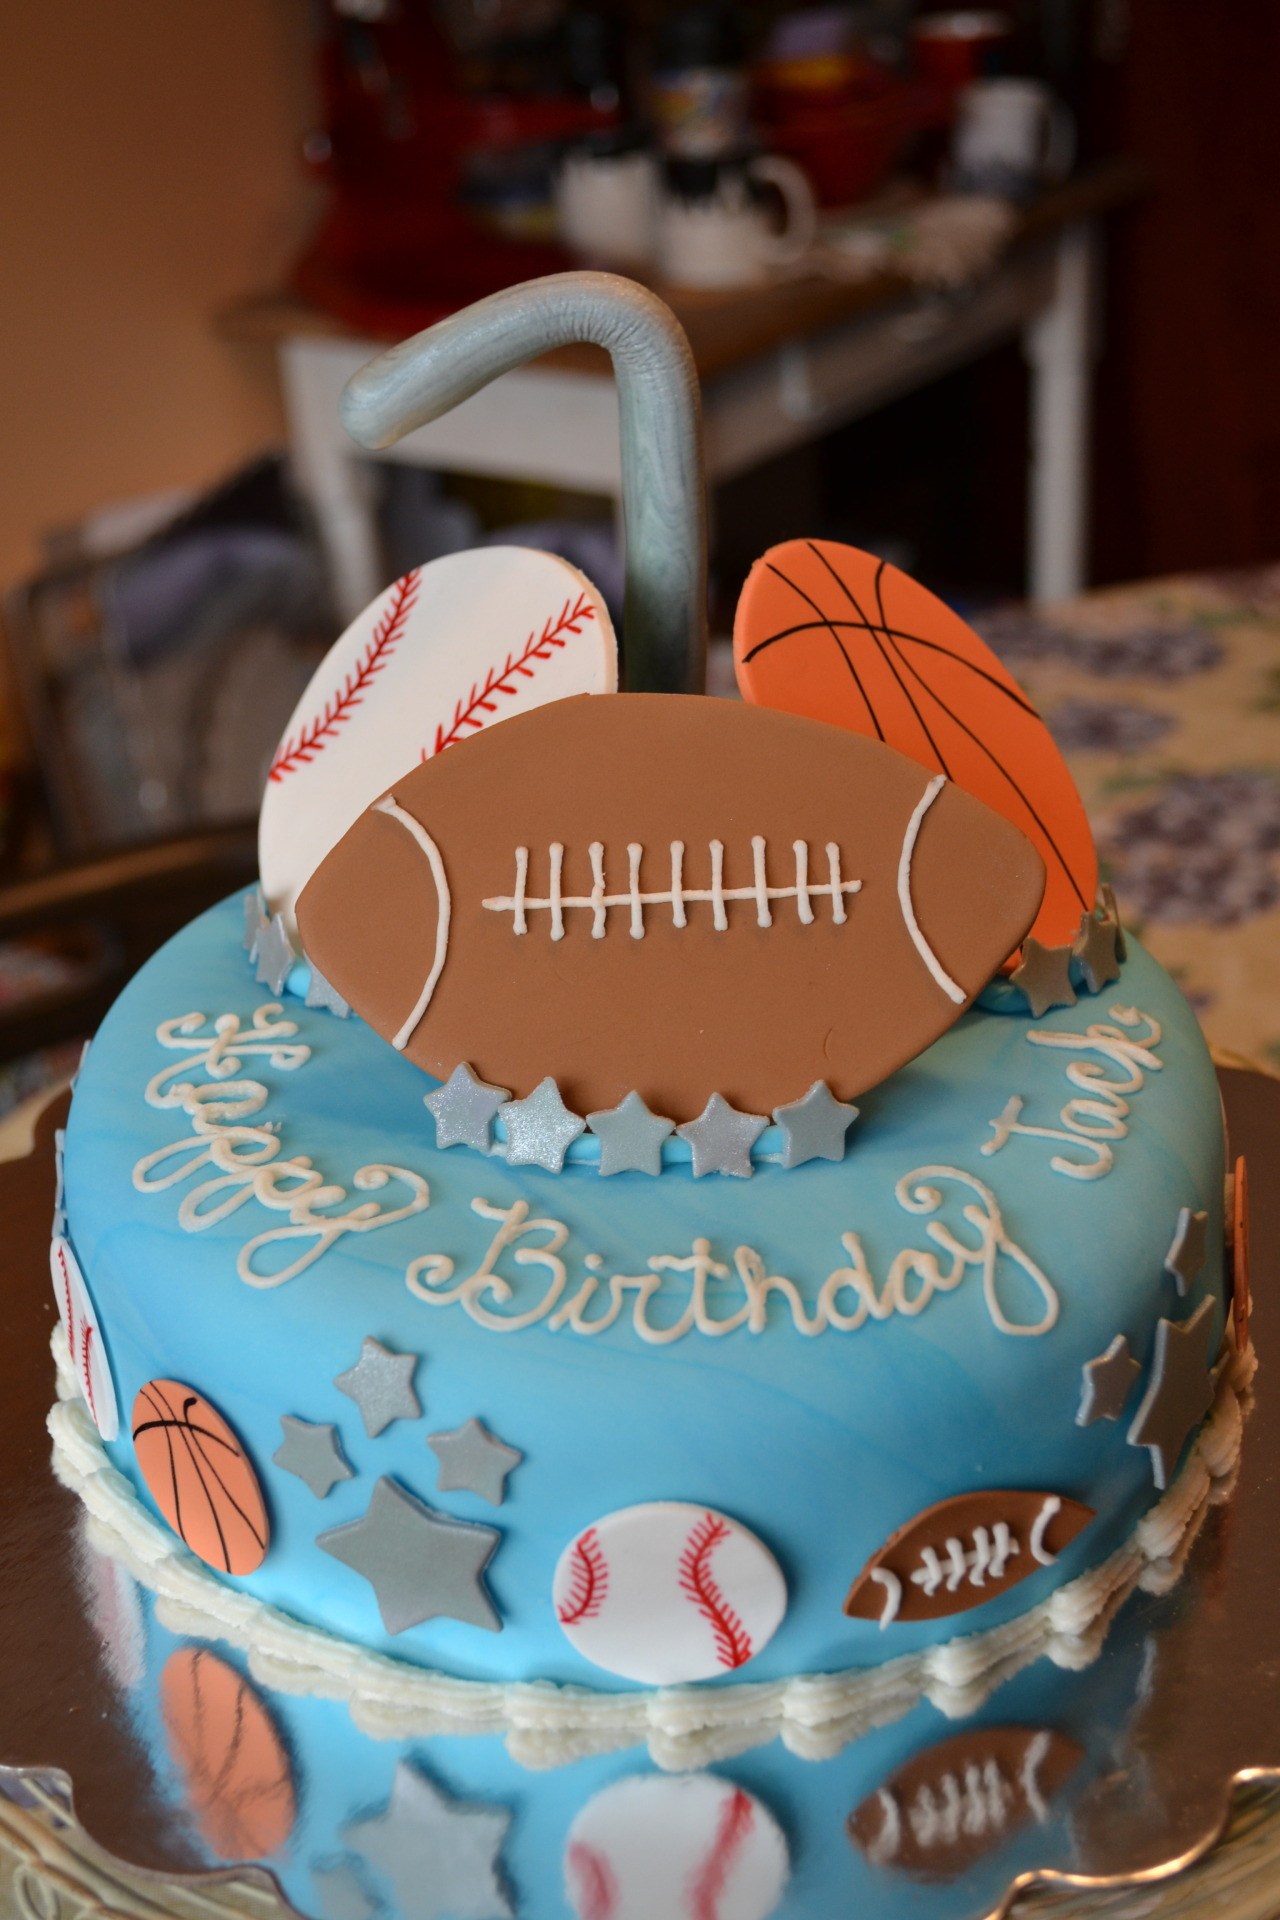 Sports Themed Birthday Cakes
 The Crocheted Cupcake Sports themed birthday cake and